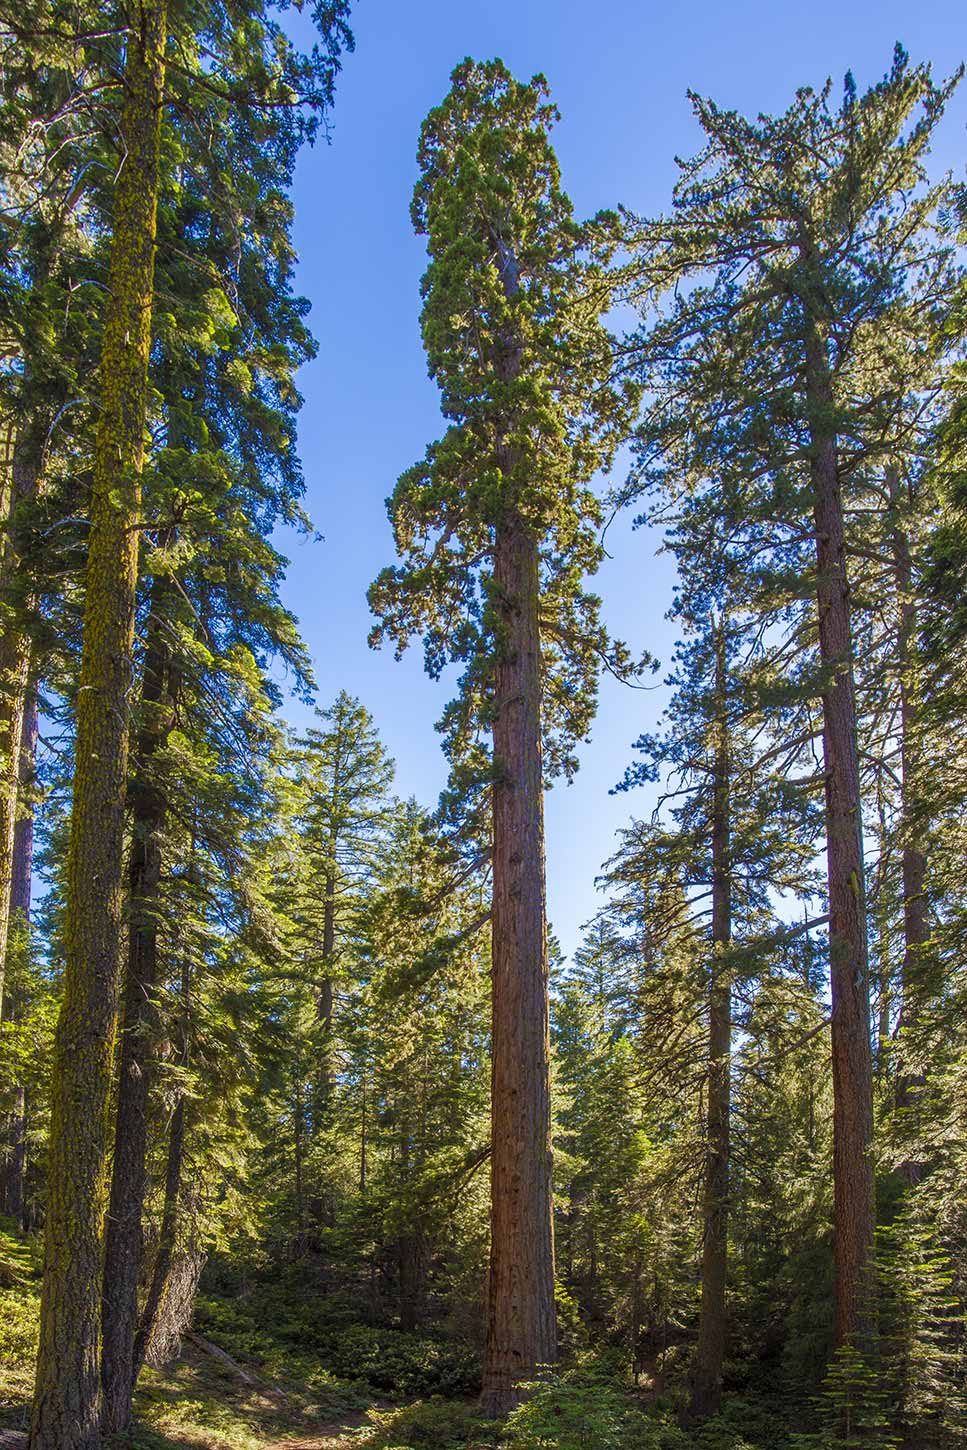 The Pershing Tree in the Placer County Grove